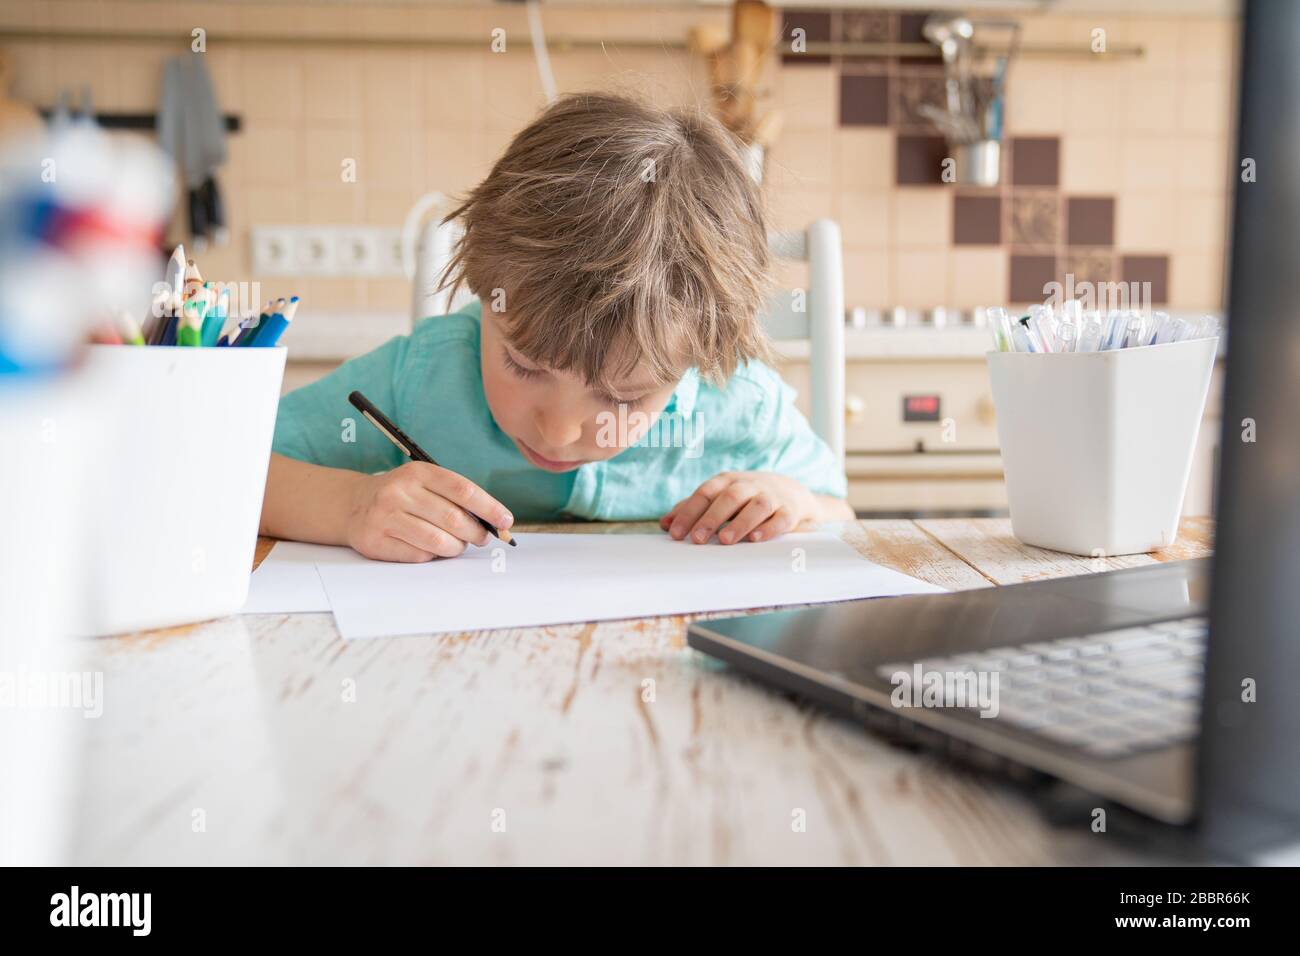 Covid lockdown - boy learns to draw online during self-isolation Stock Photo